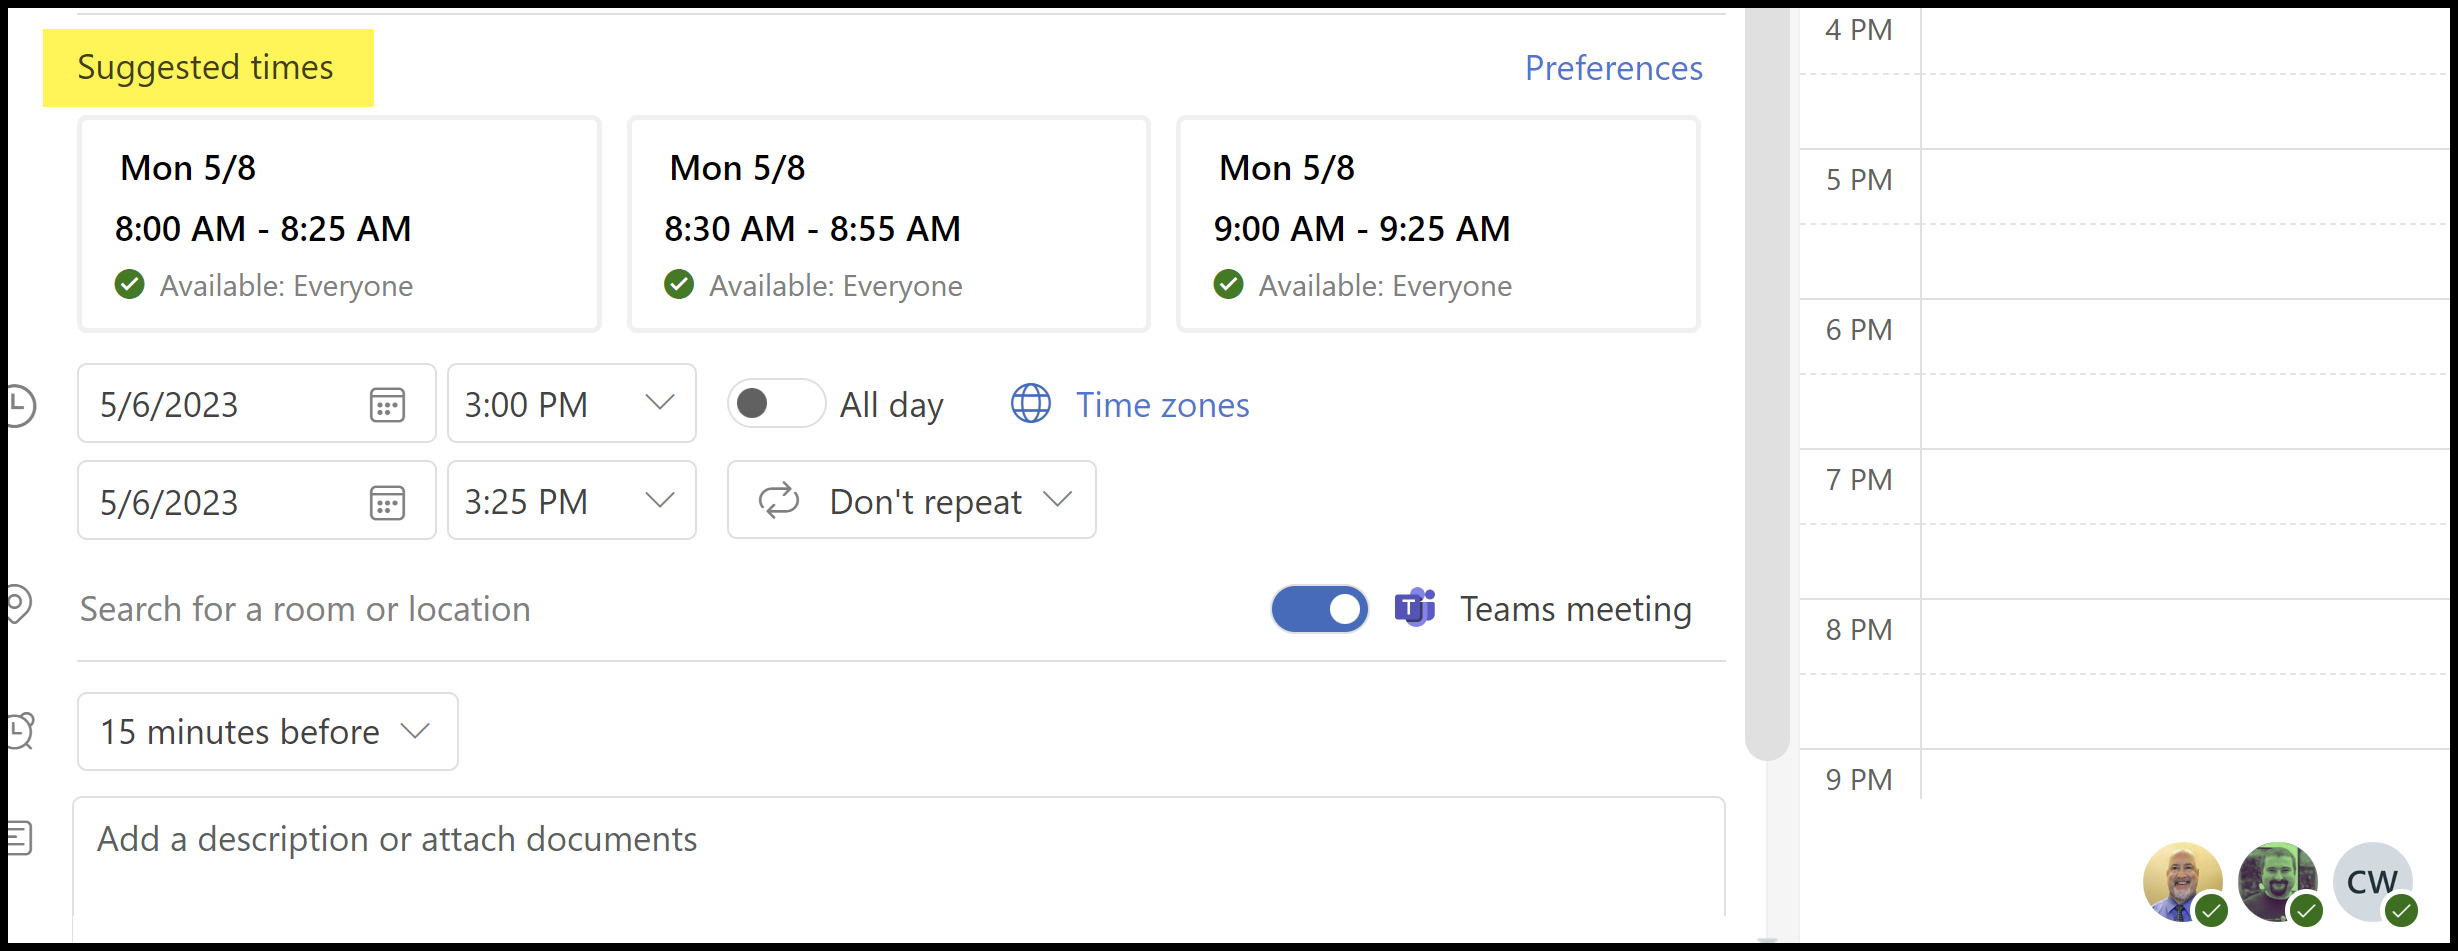 Suggested Times in Outlook on the web